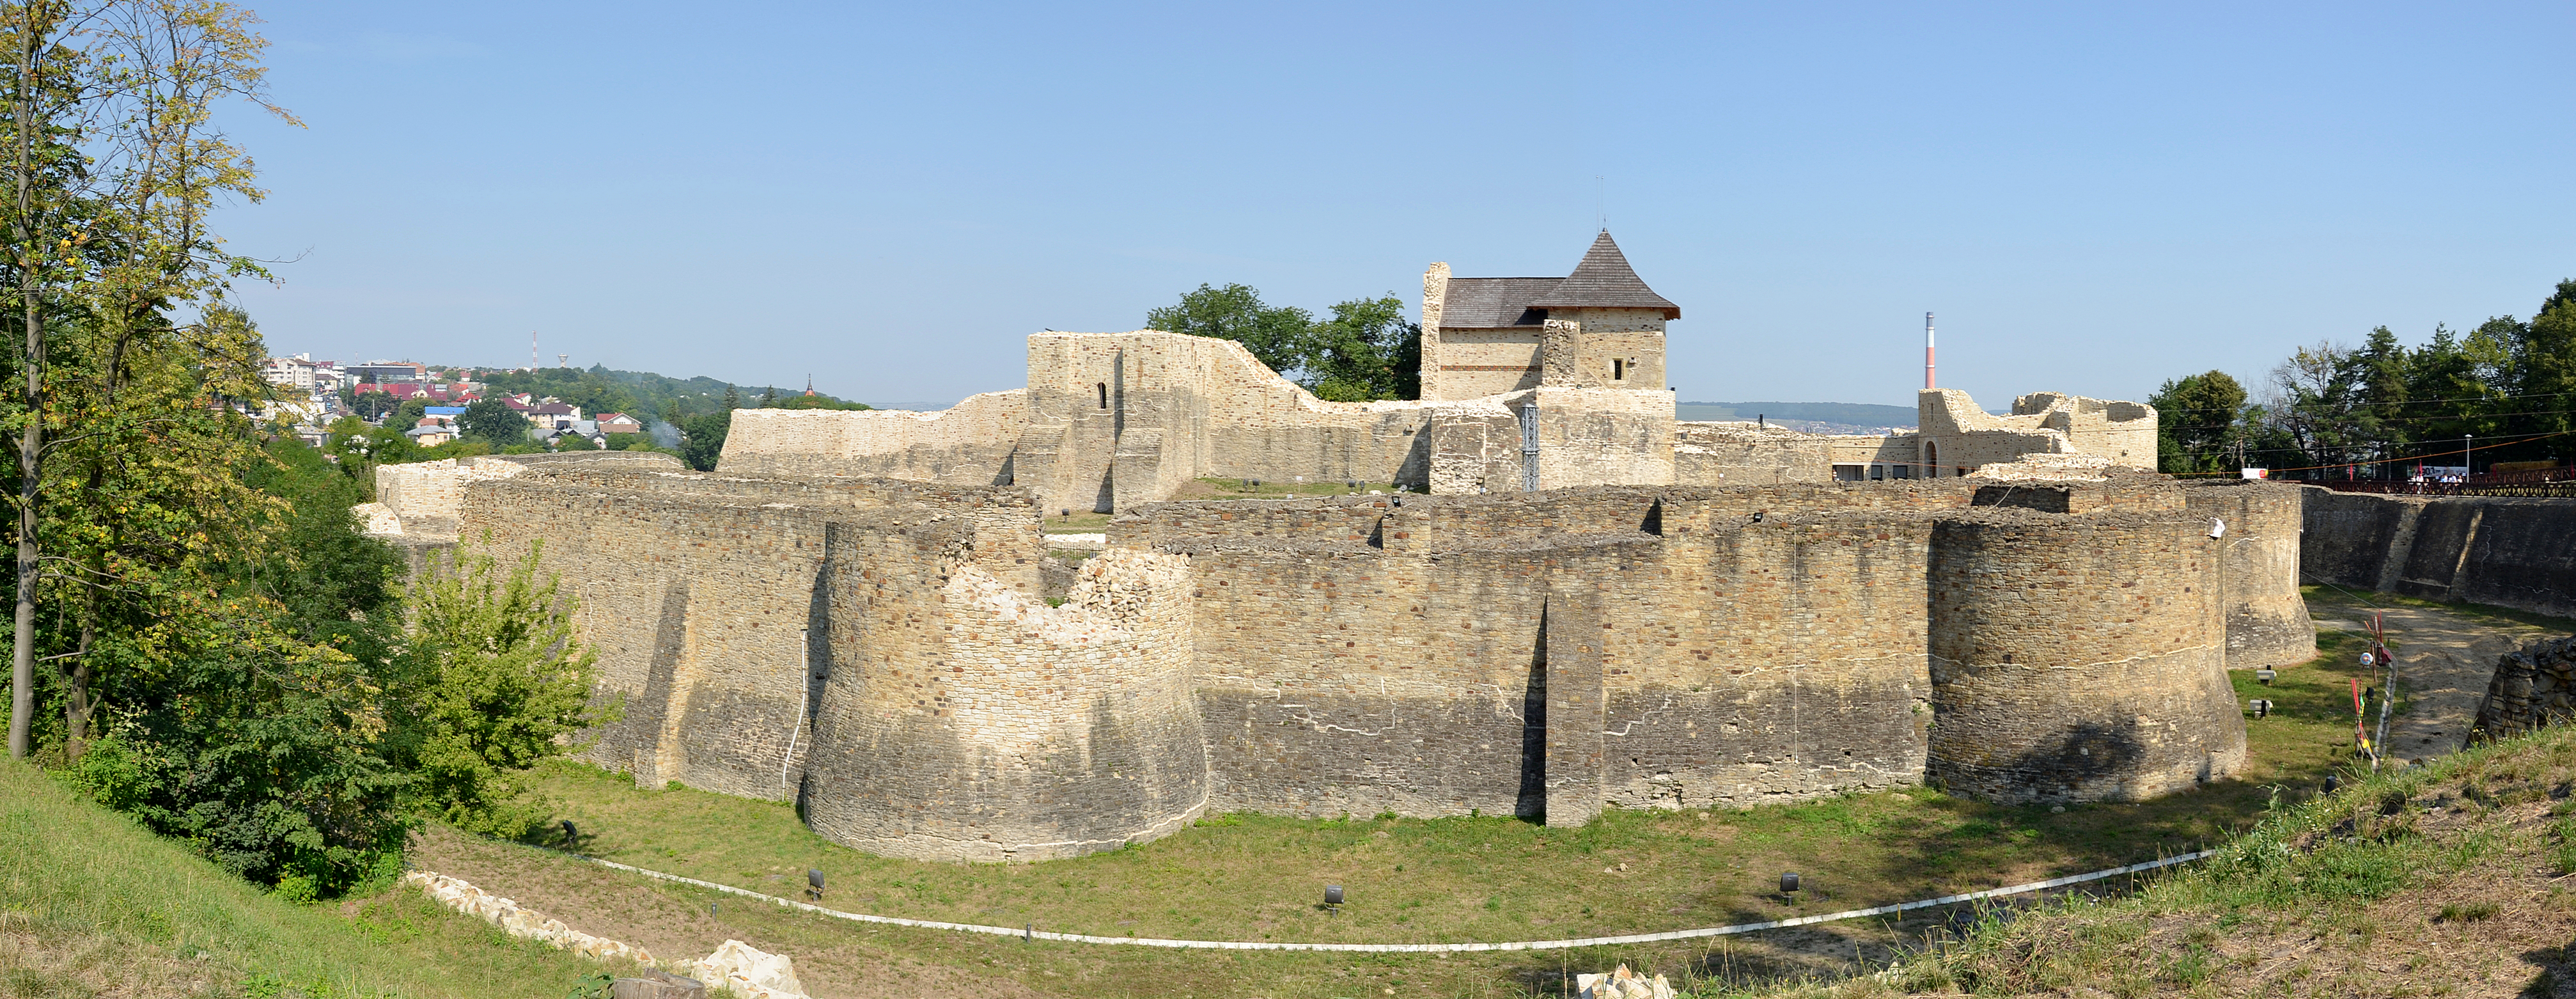 Suceava fortress (by Pudelek)